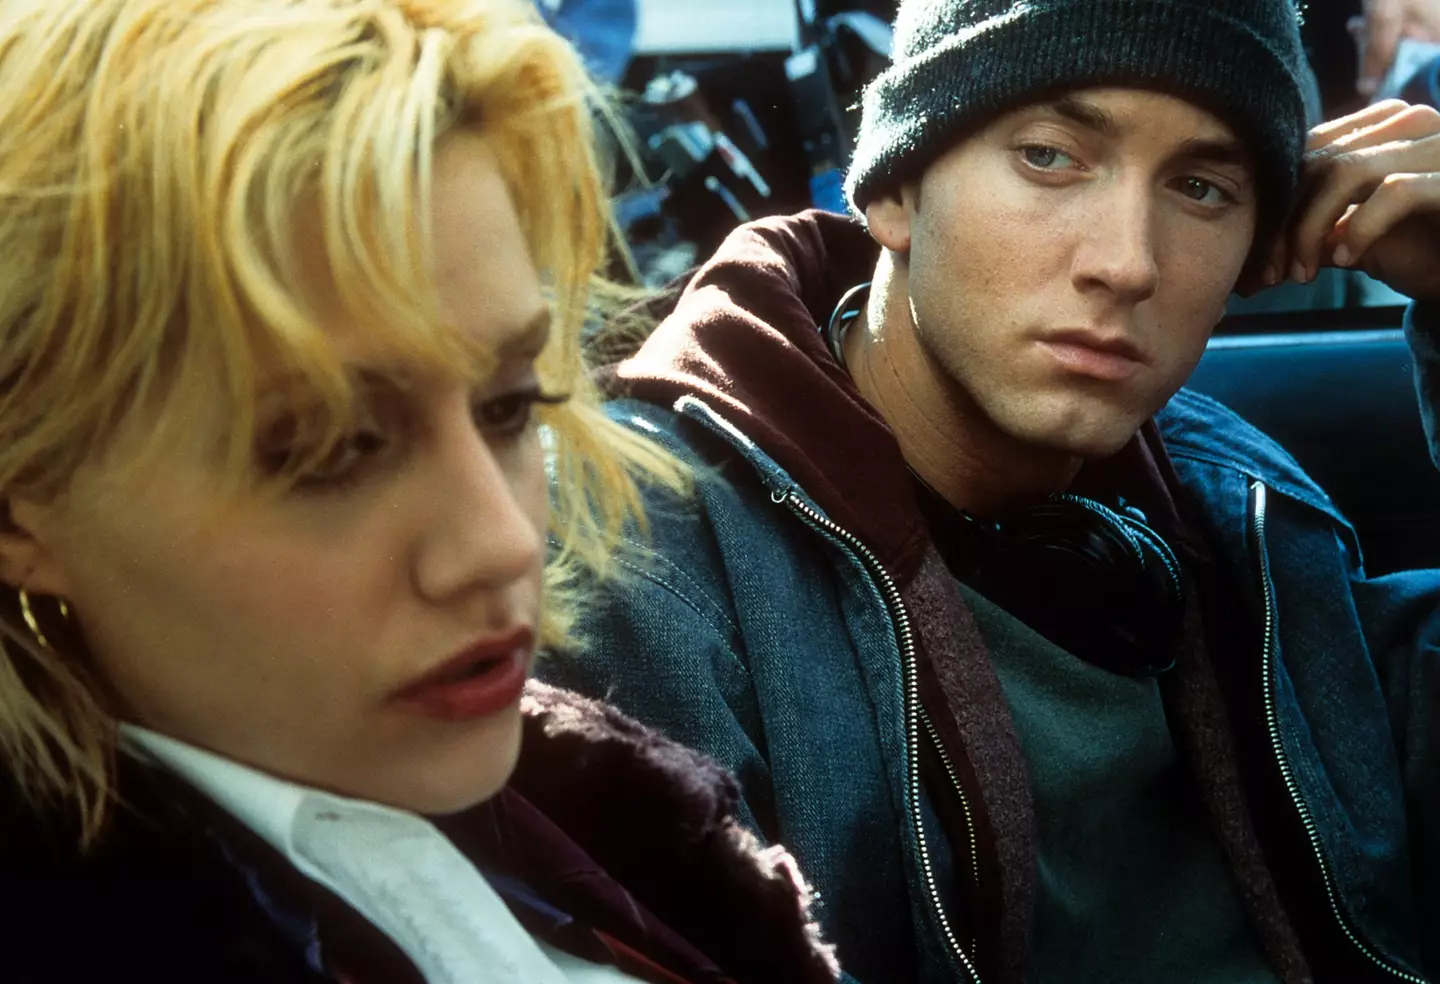 The pair starred in 8 Mile together.